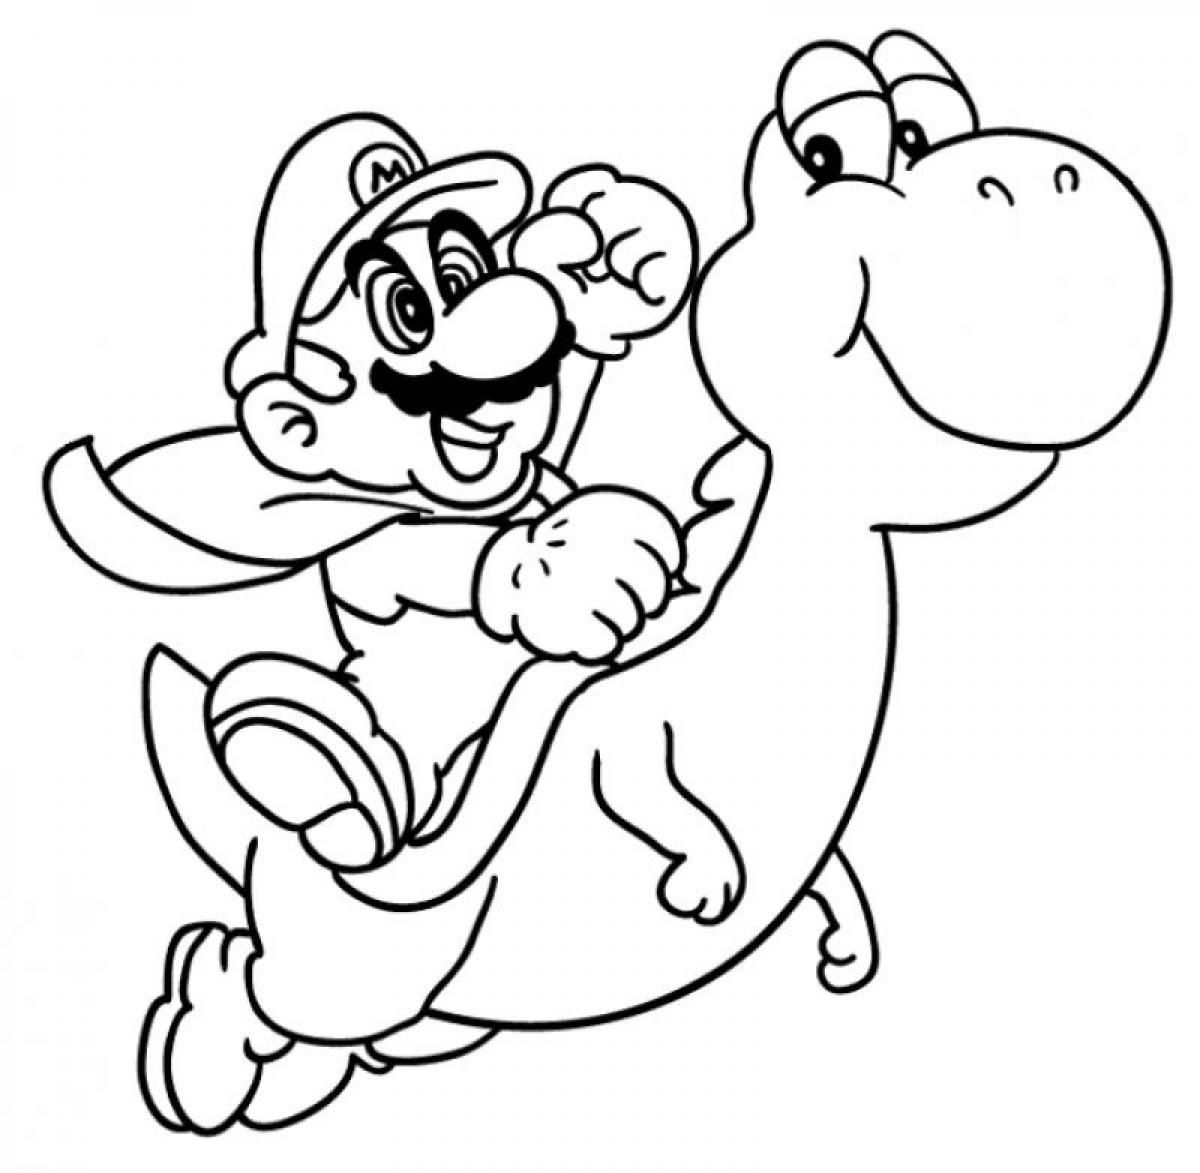 17 Free Pictures for: Yoshi Coloring Pages. Temoon.us